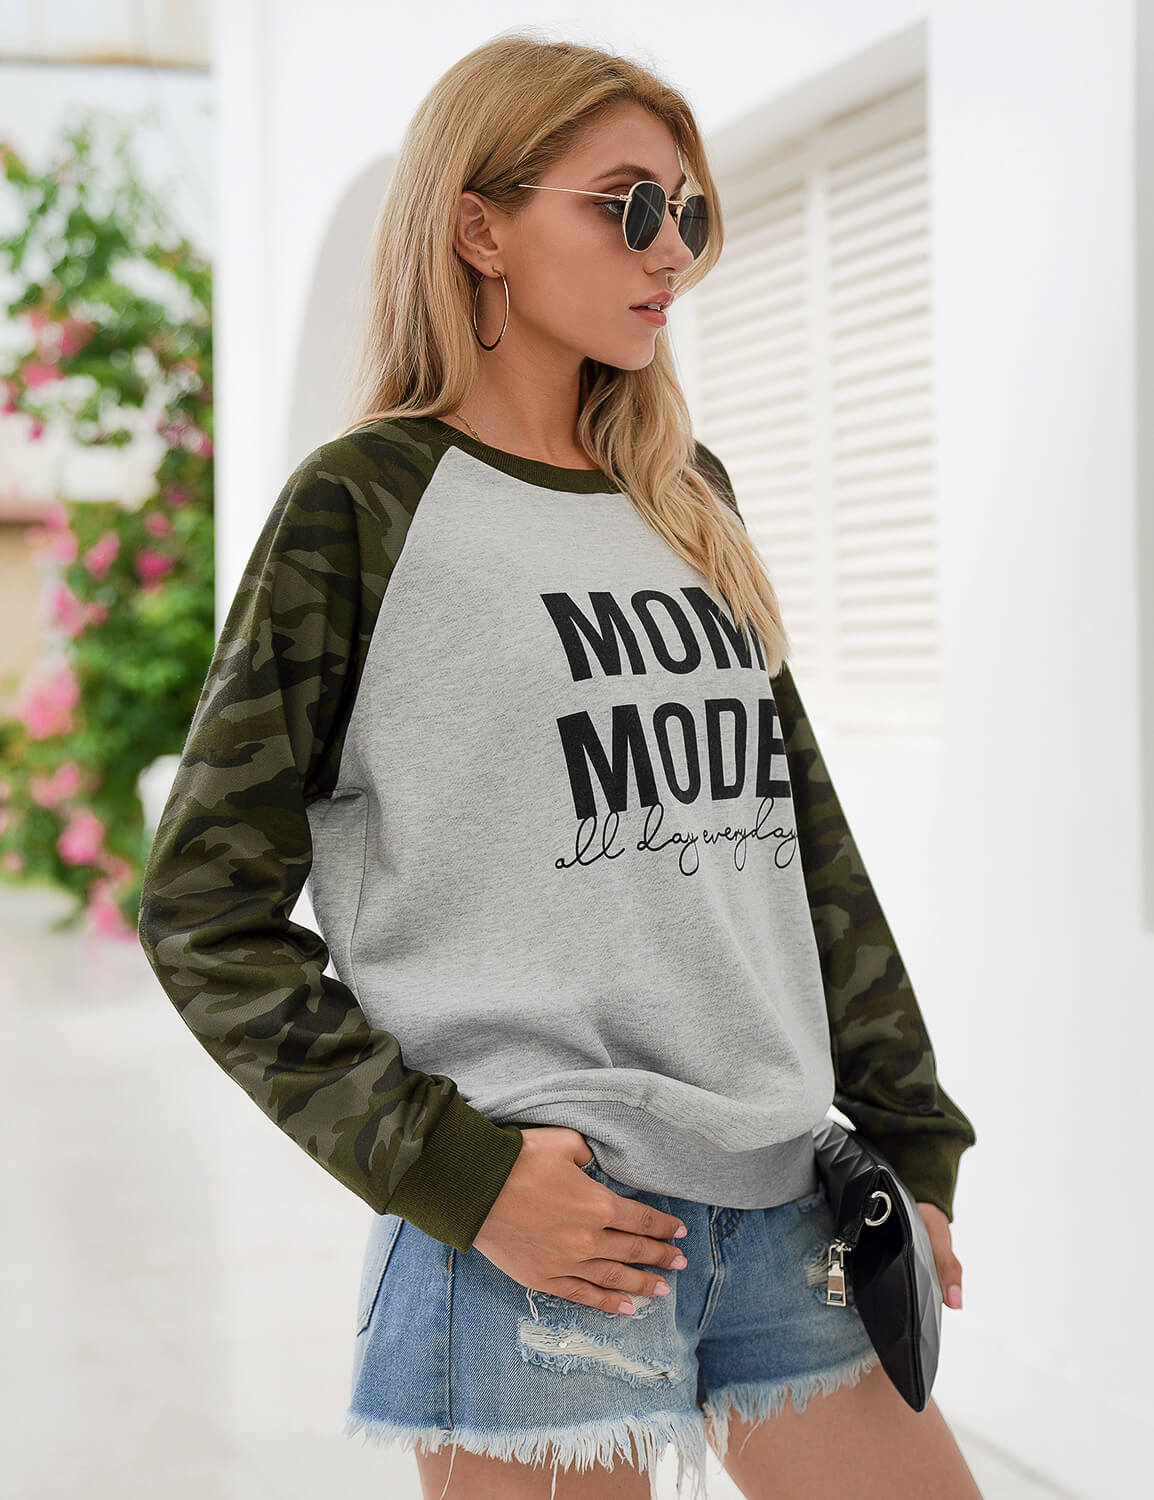 Blooming Jelly_Mom Mode Camo Patchwork Sweatshirt_Letter Print_303087_07_Mom Style Casual Outfits_Tops_Sweatshirt